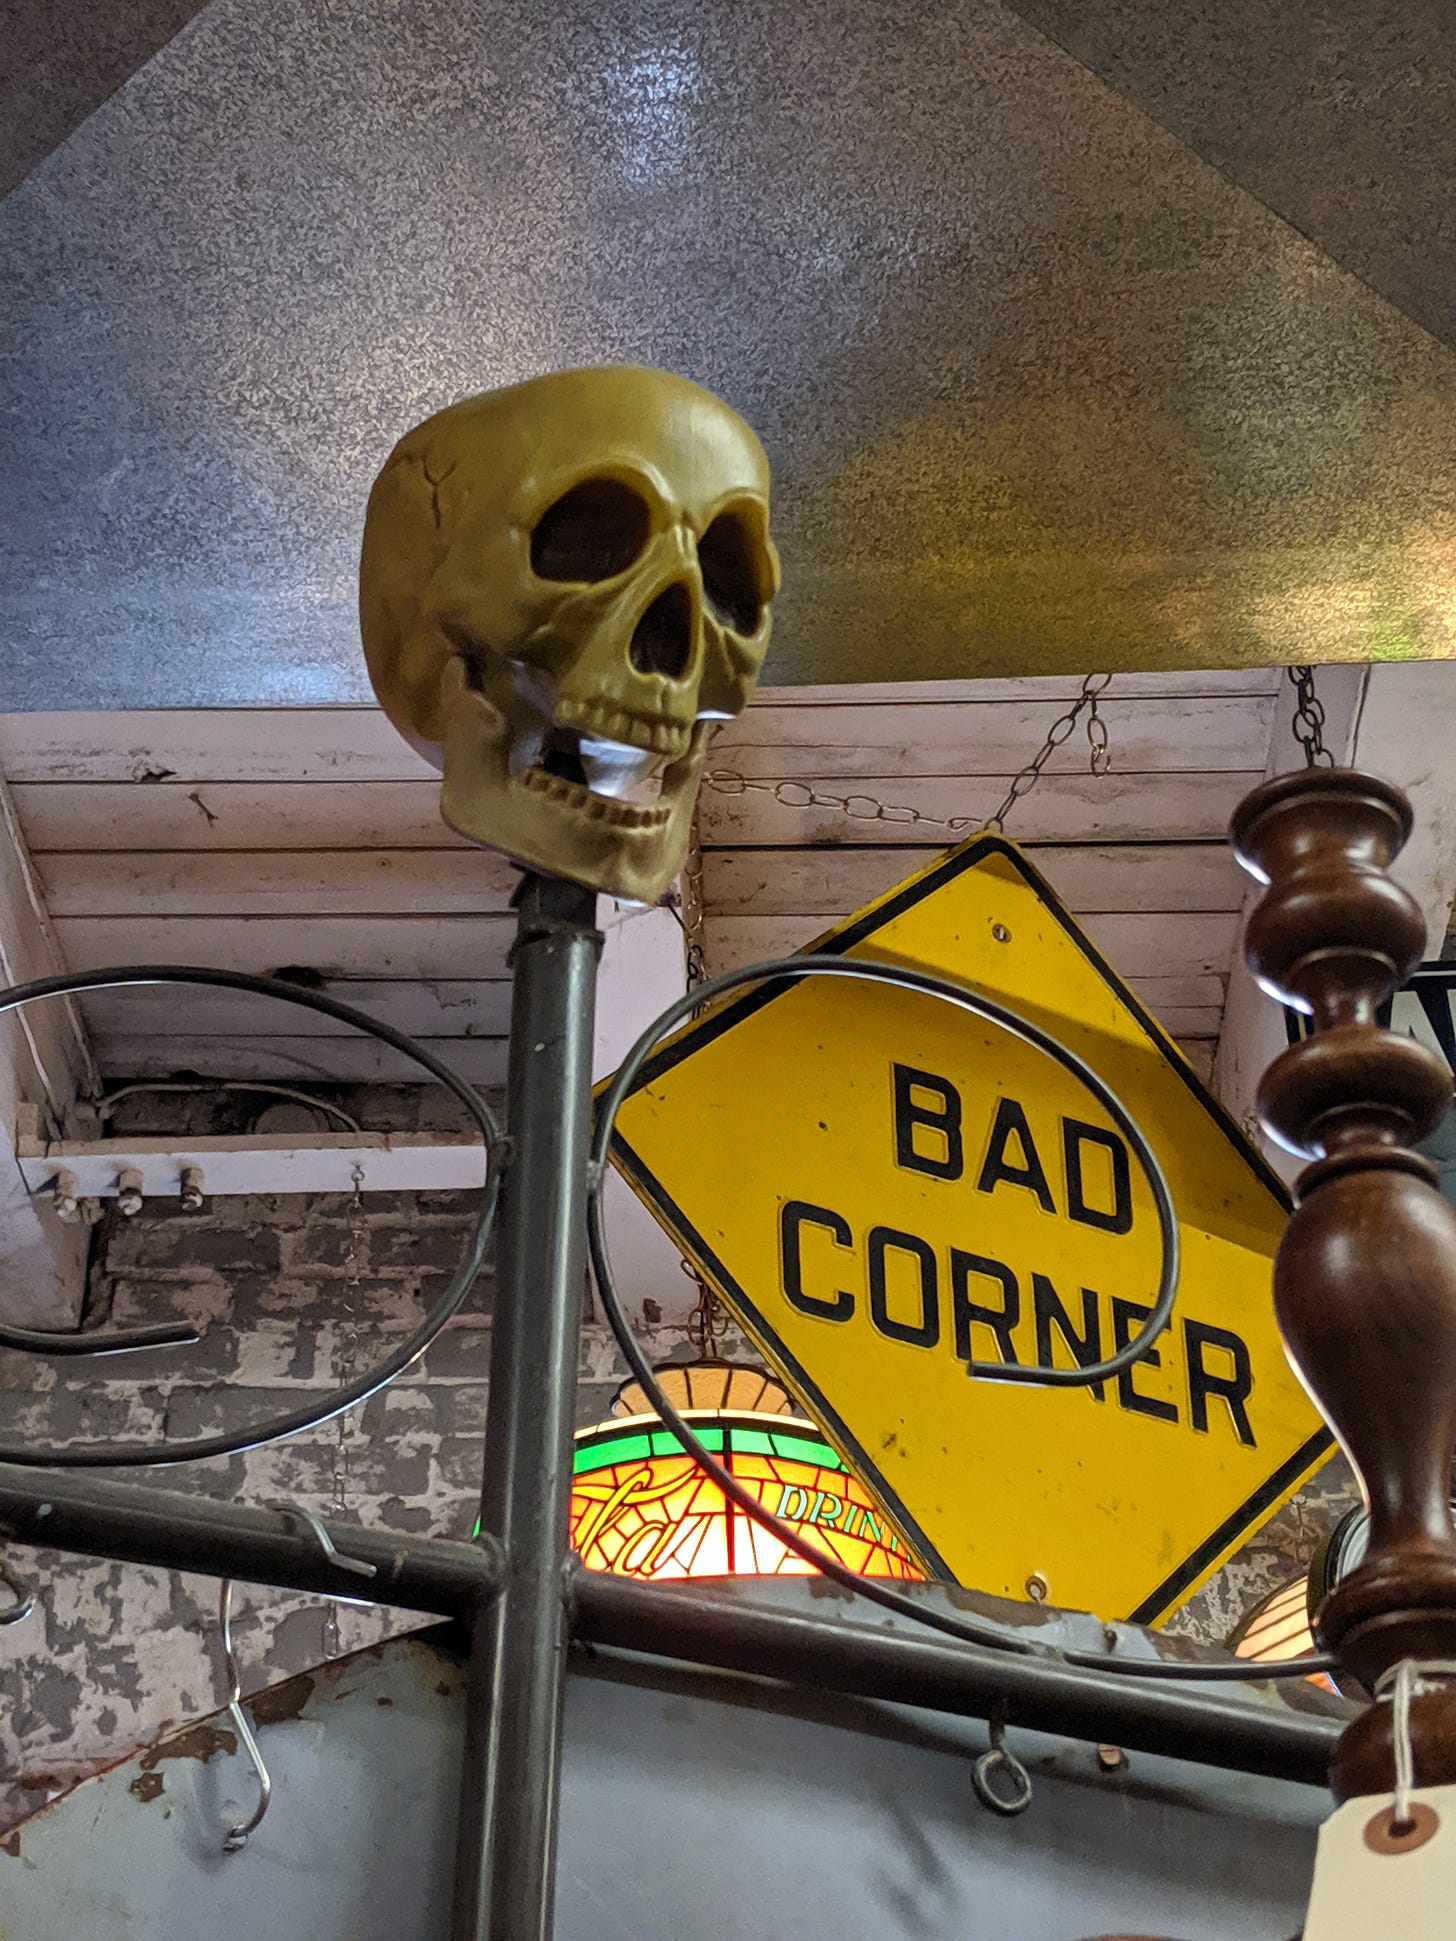 photograph: a plastic skull, a yellow diamond-shaped road sign saying BAD CORNER, and pieces of a brick wall, a bedframe, and maybe a stained glass window